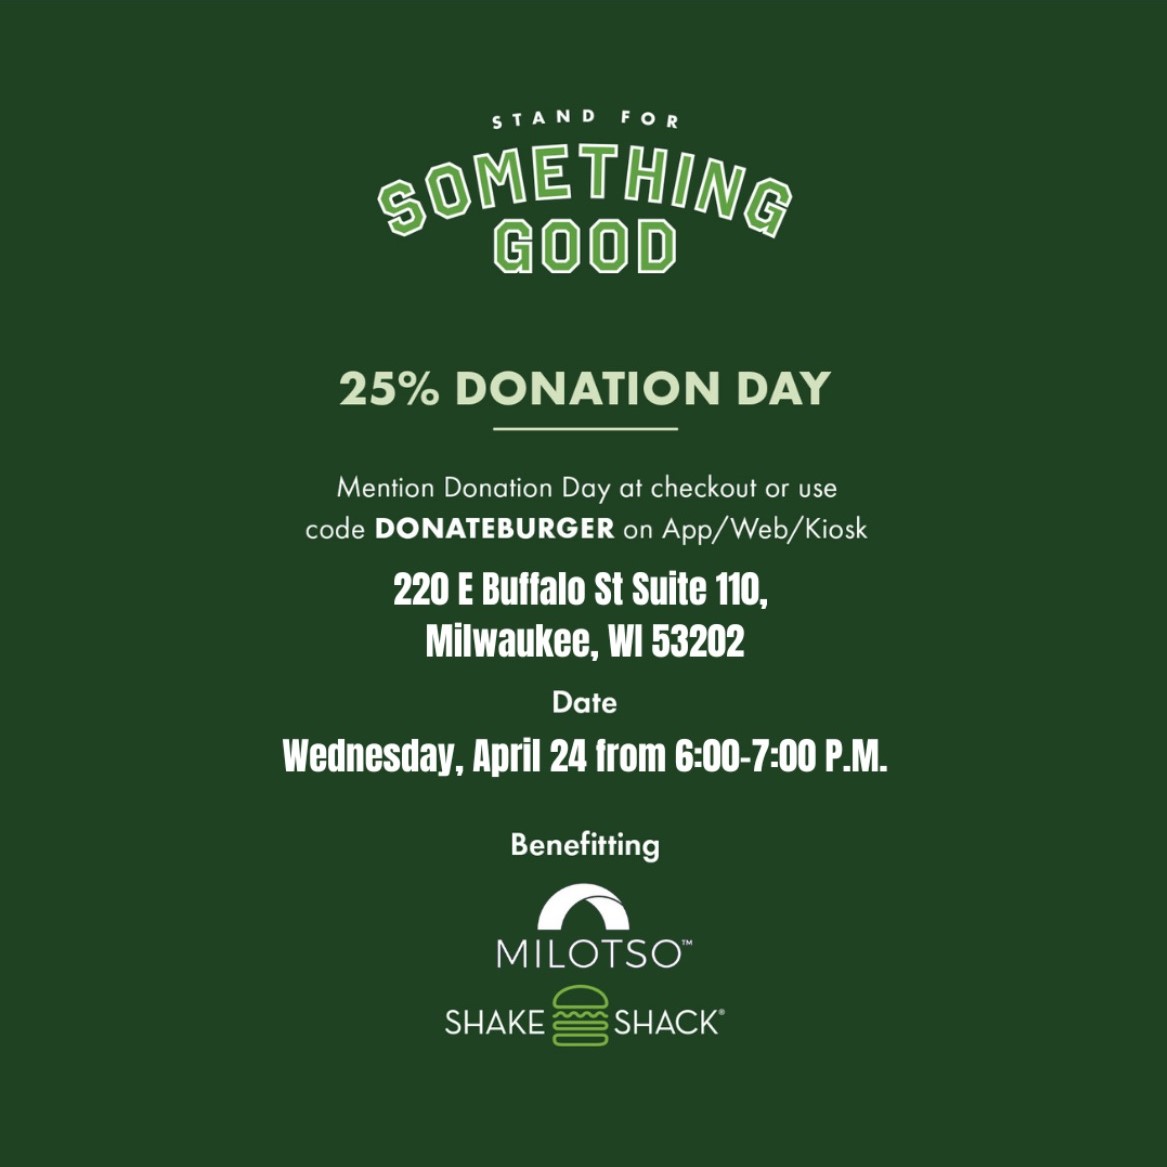 Join Billy Rojack and Jacob Nottoli in the Third Ward @shakeshack location from 6-7 p.m. for their Stand for Something Good initative in support of @MILOTSO_. Mention 'Donation Day' at checkout or use code DONATEBURGER online. #WeAreMarquette